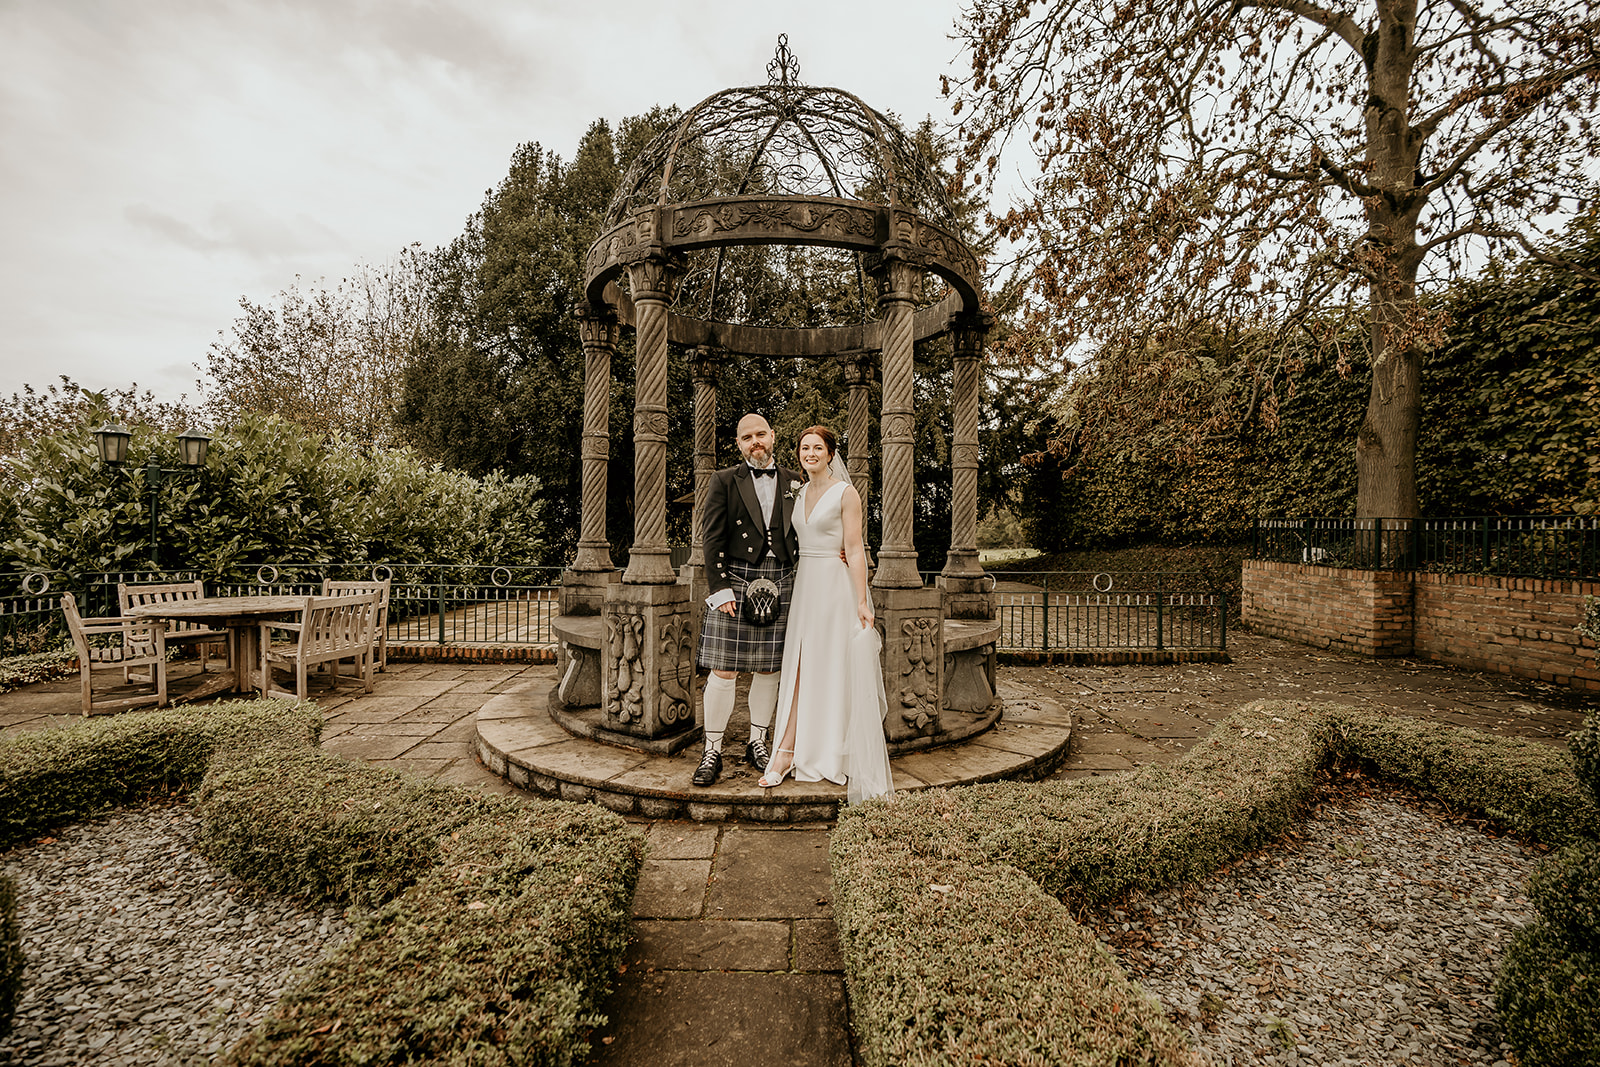 Bride and Groom outside in gardens